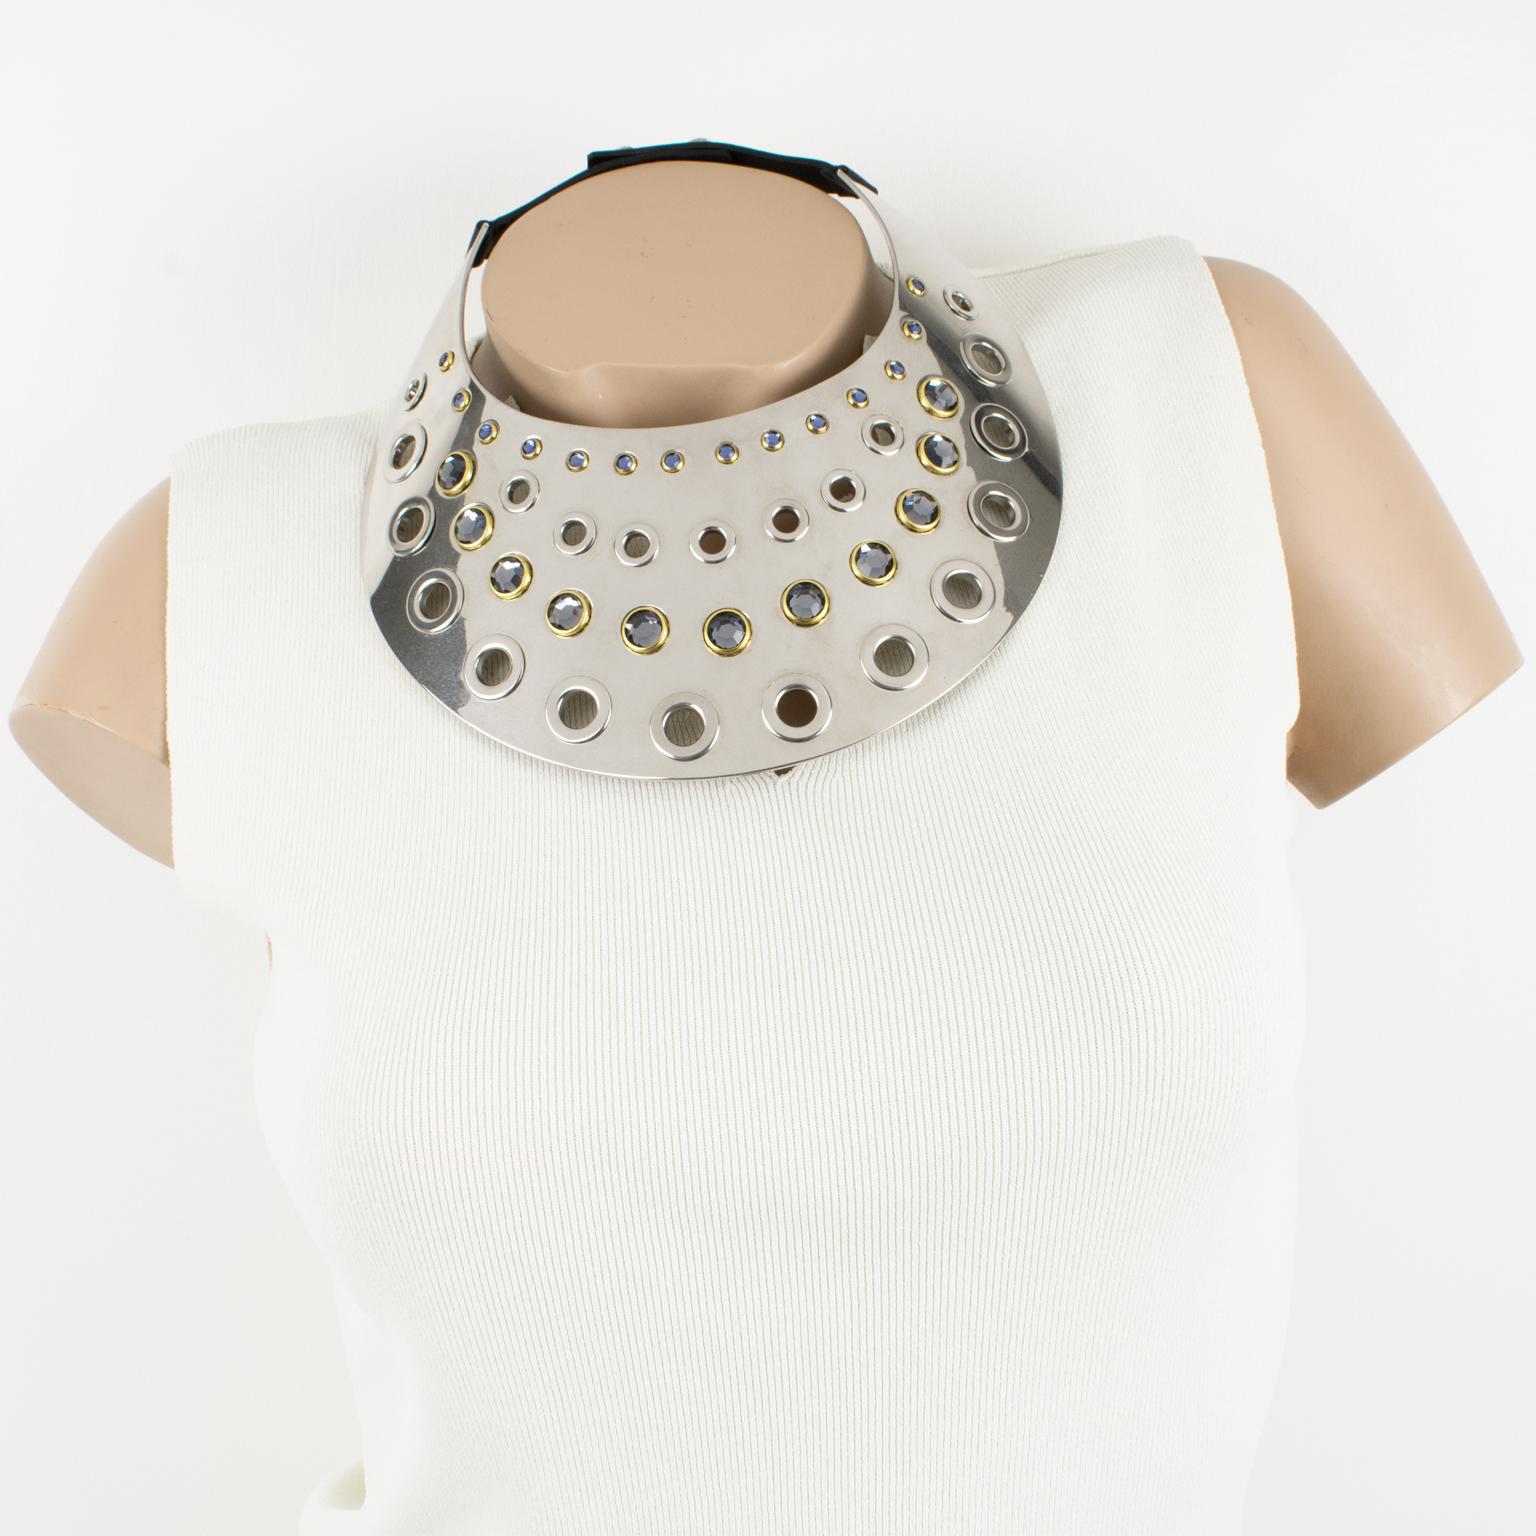 This spectacular Sonia Rykiel Paris sculptural futuristic choker necklace features a massive flat rigid bib shape in shiny chromed metal with see-thru carving and ornate with crystal rhinestones. The necklace has an adjustable leather closing link